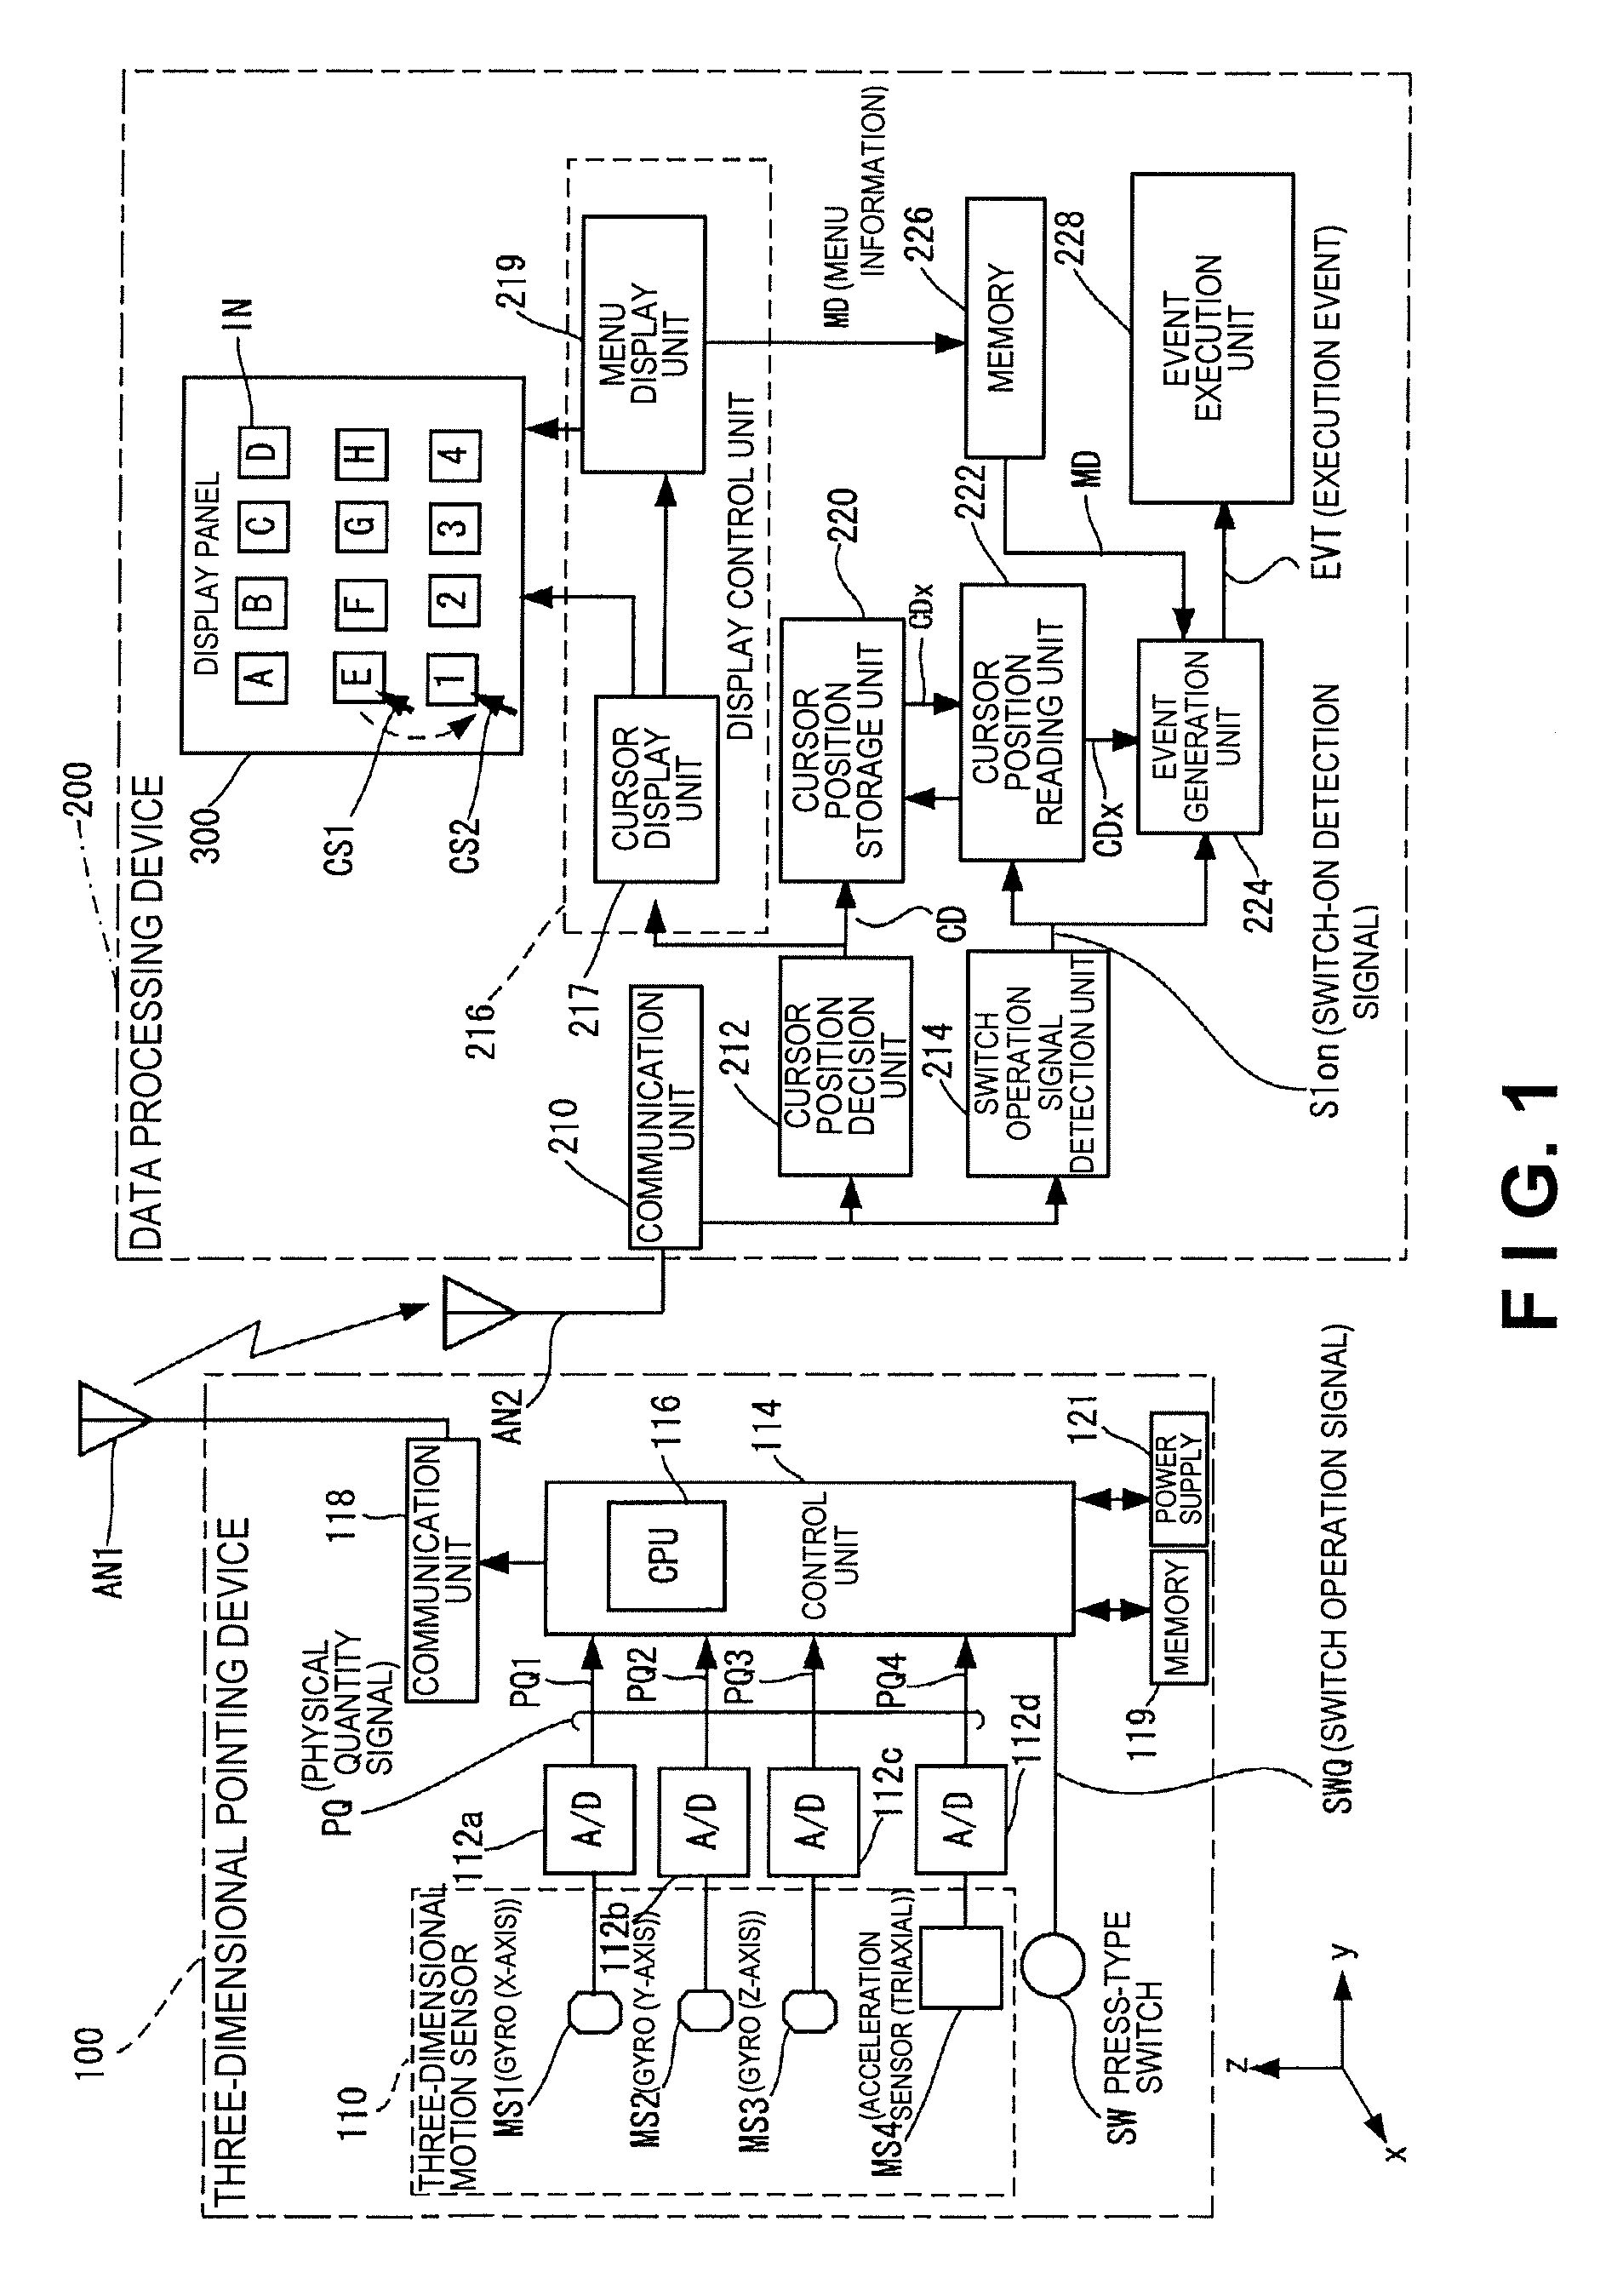 Pointing device, data processing device, and data processing system